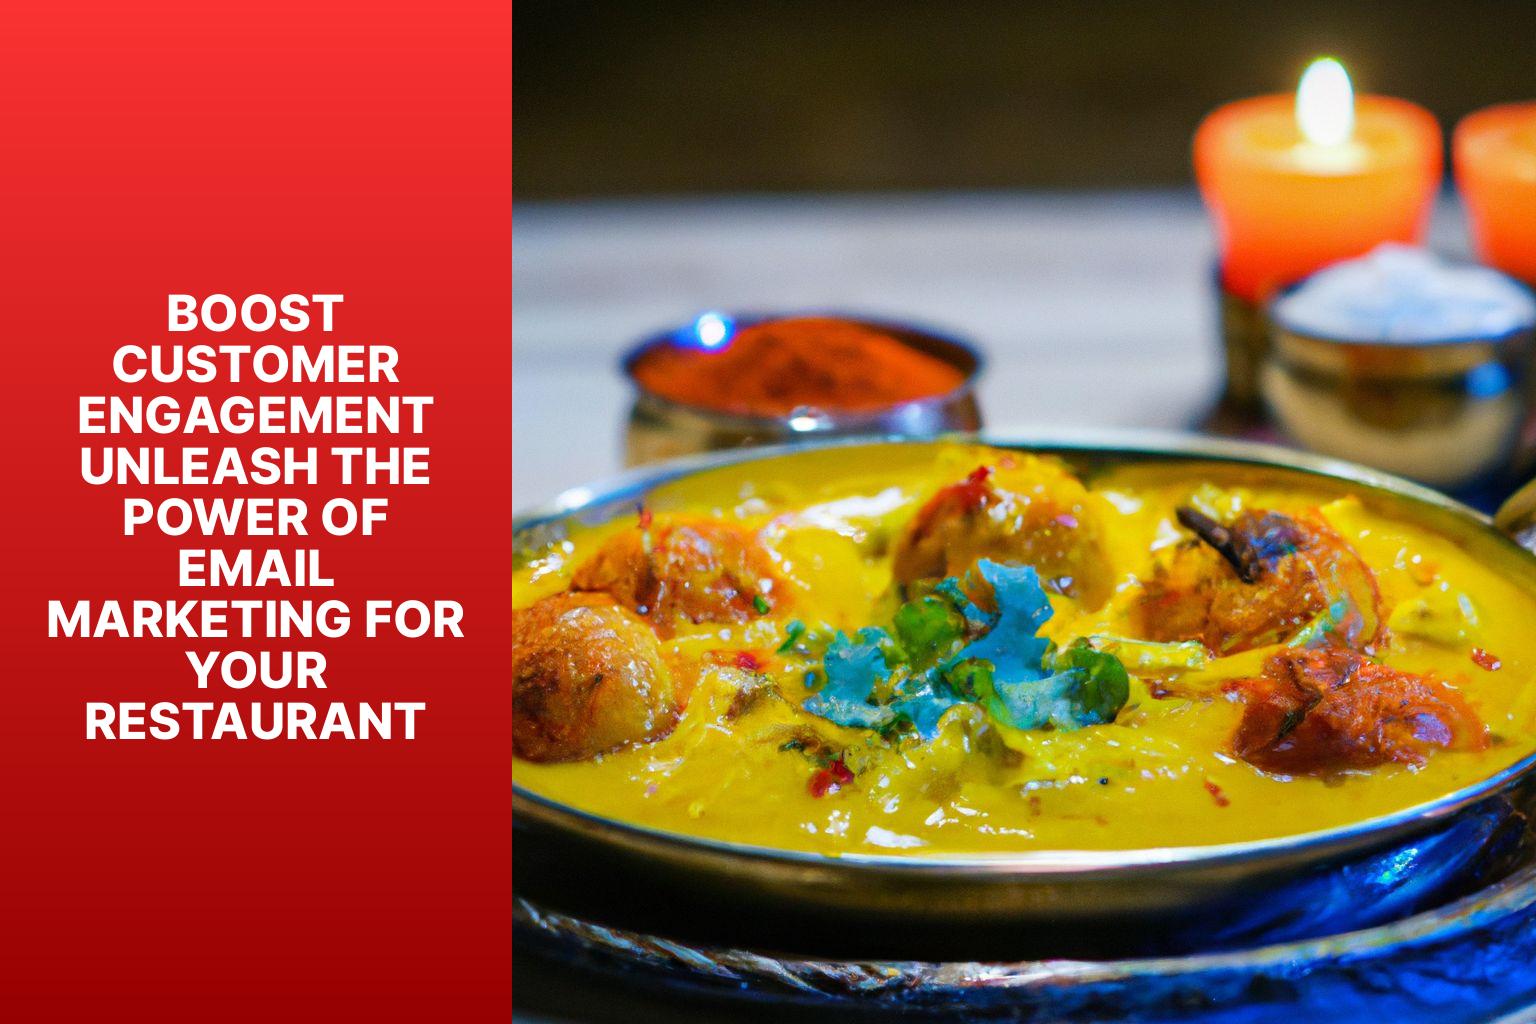 Boost Customer Engagement Unleash the Power of Email Marketing for Your Restaurant